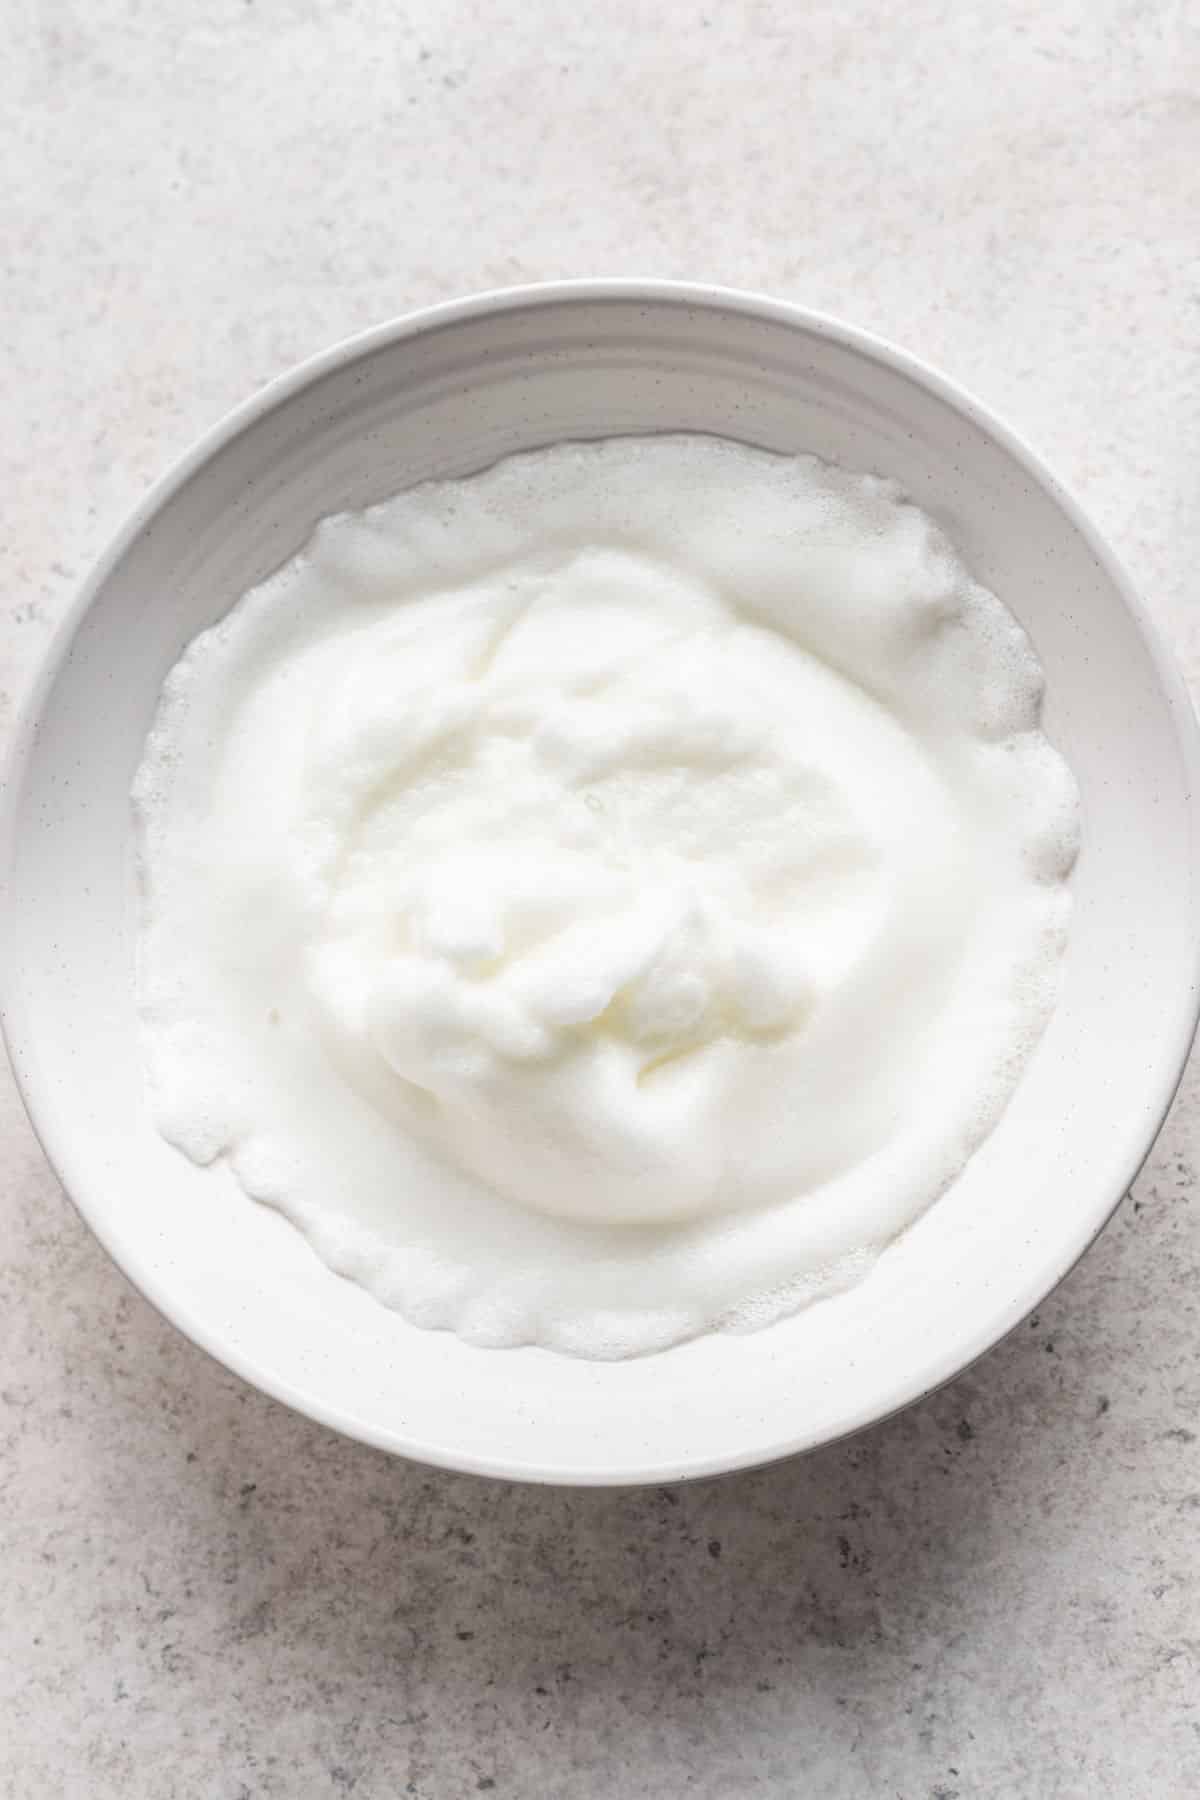 Soft peak egg whites in a mixing bowl. 